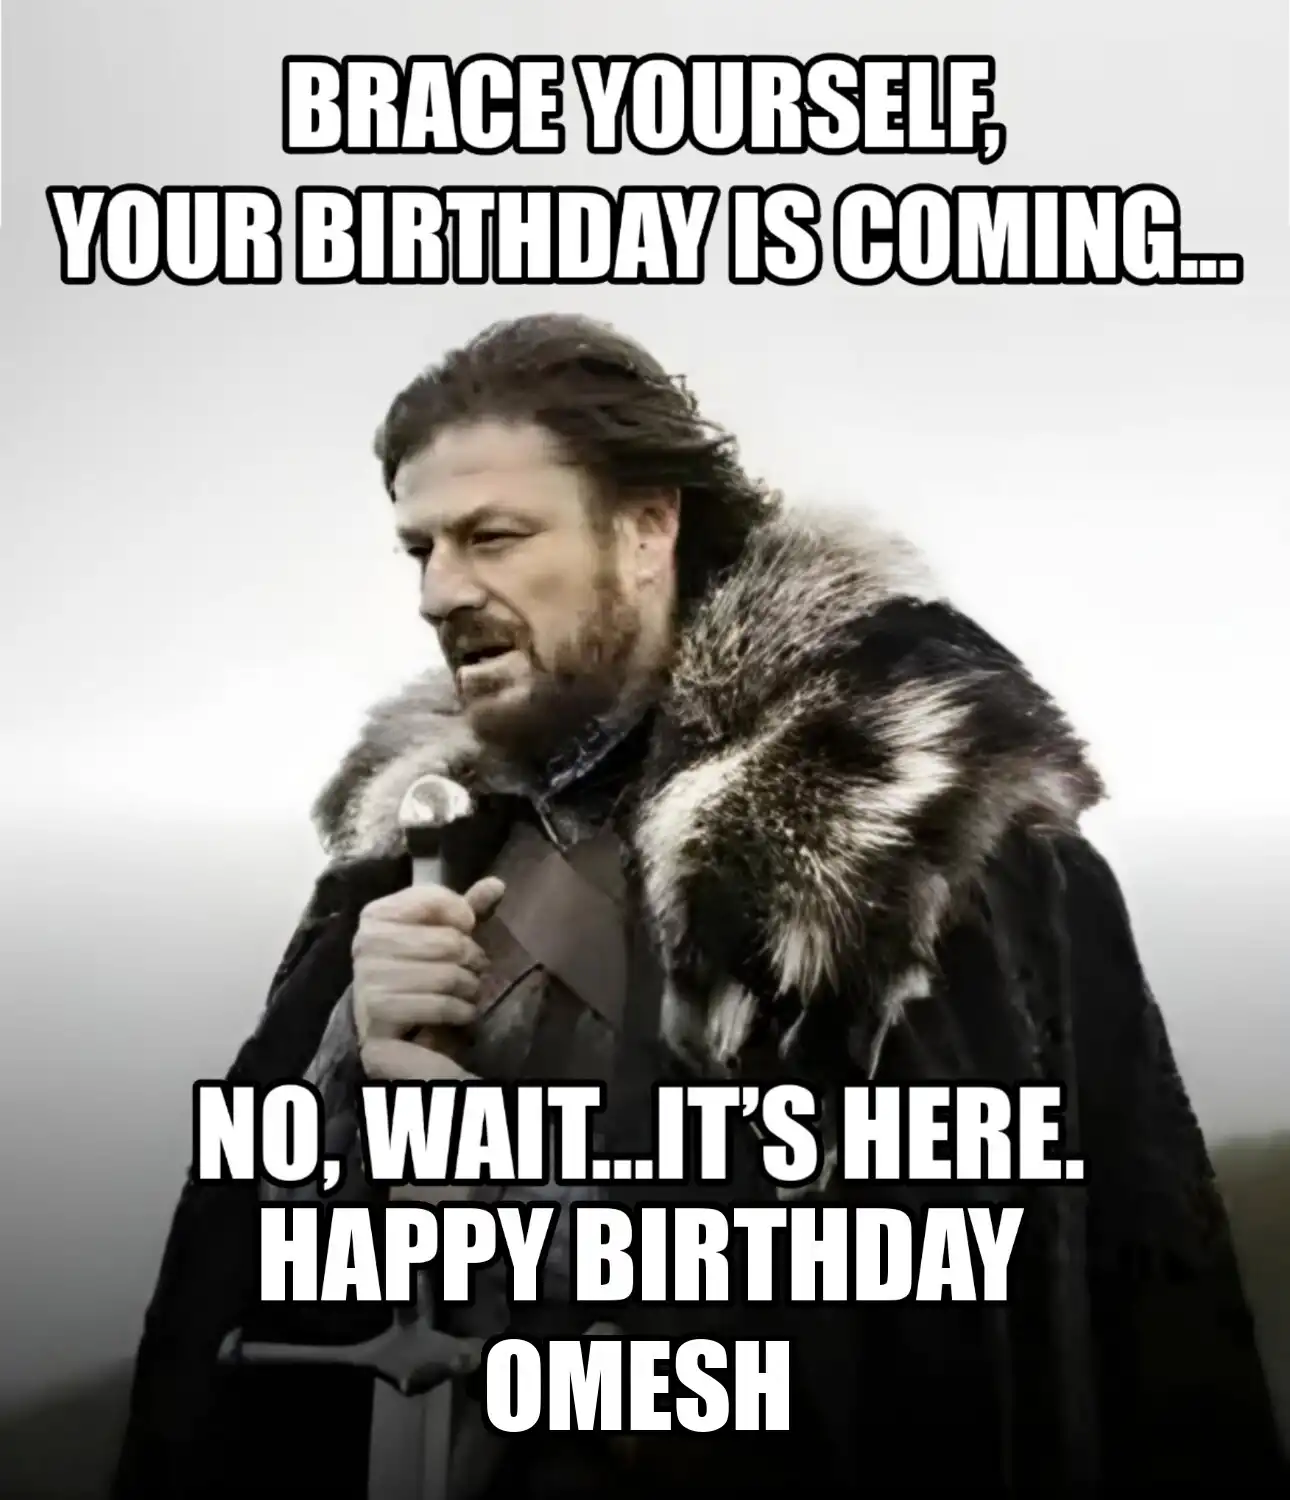 Happy Birthday Omesh Brace Yourself Your Birthday Is Coming Meme